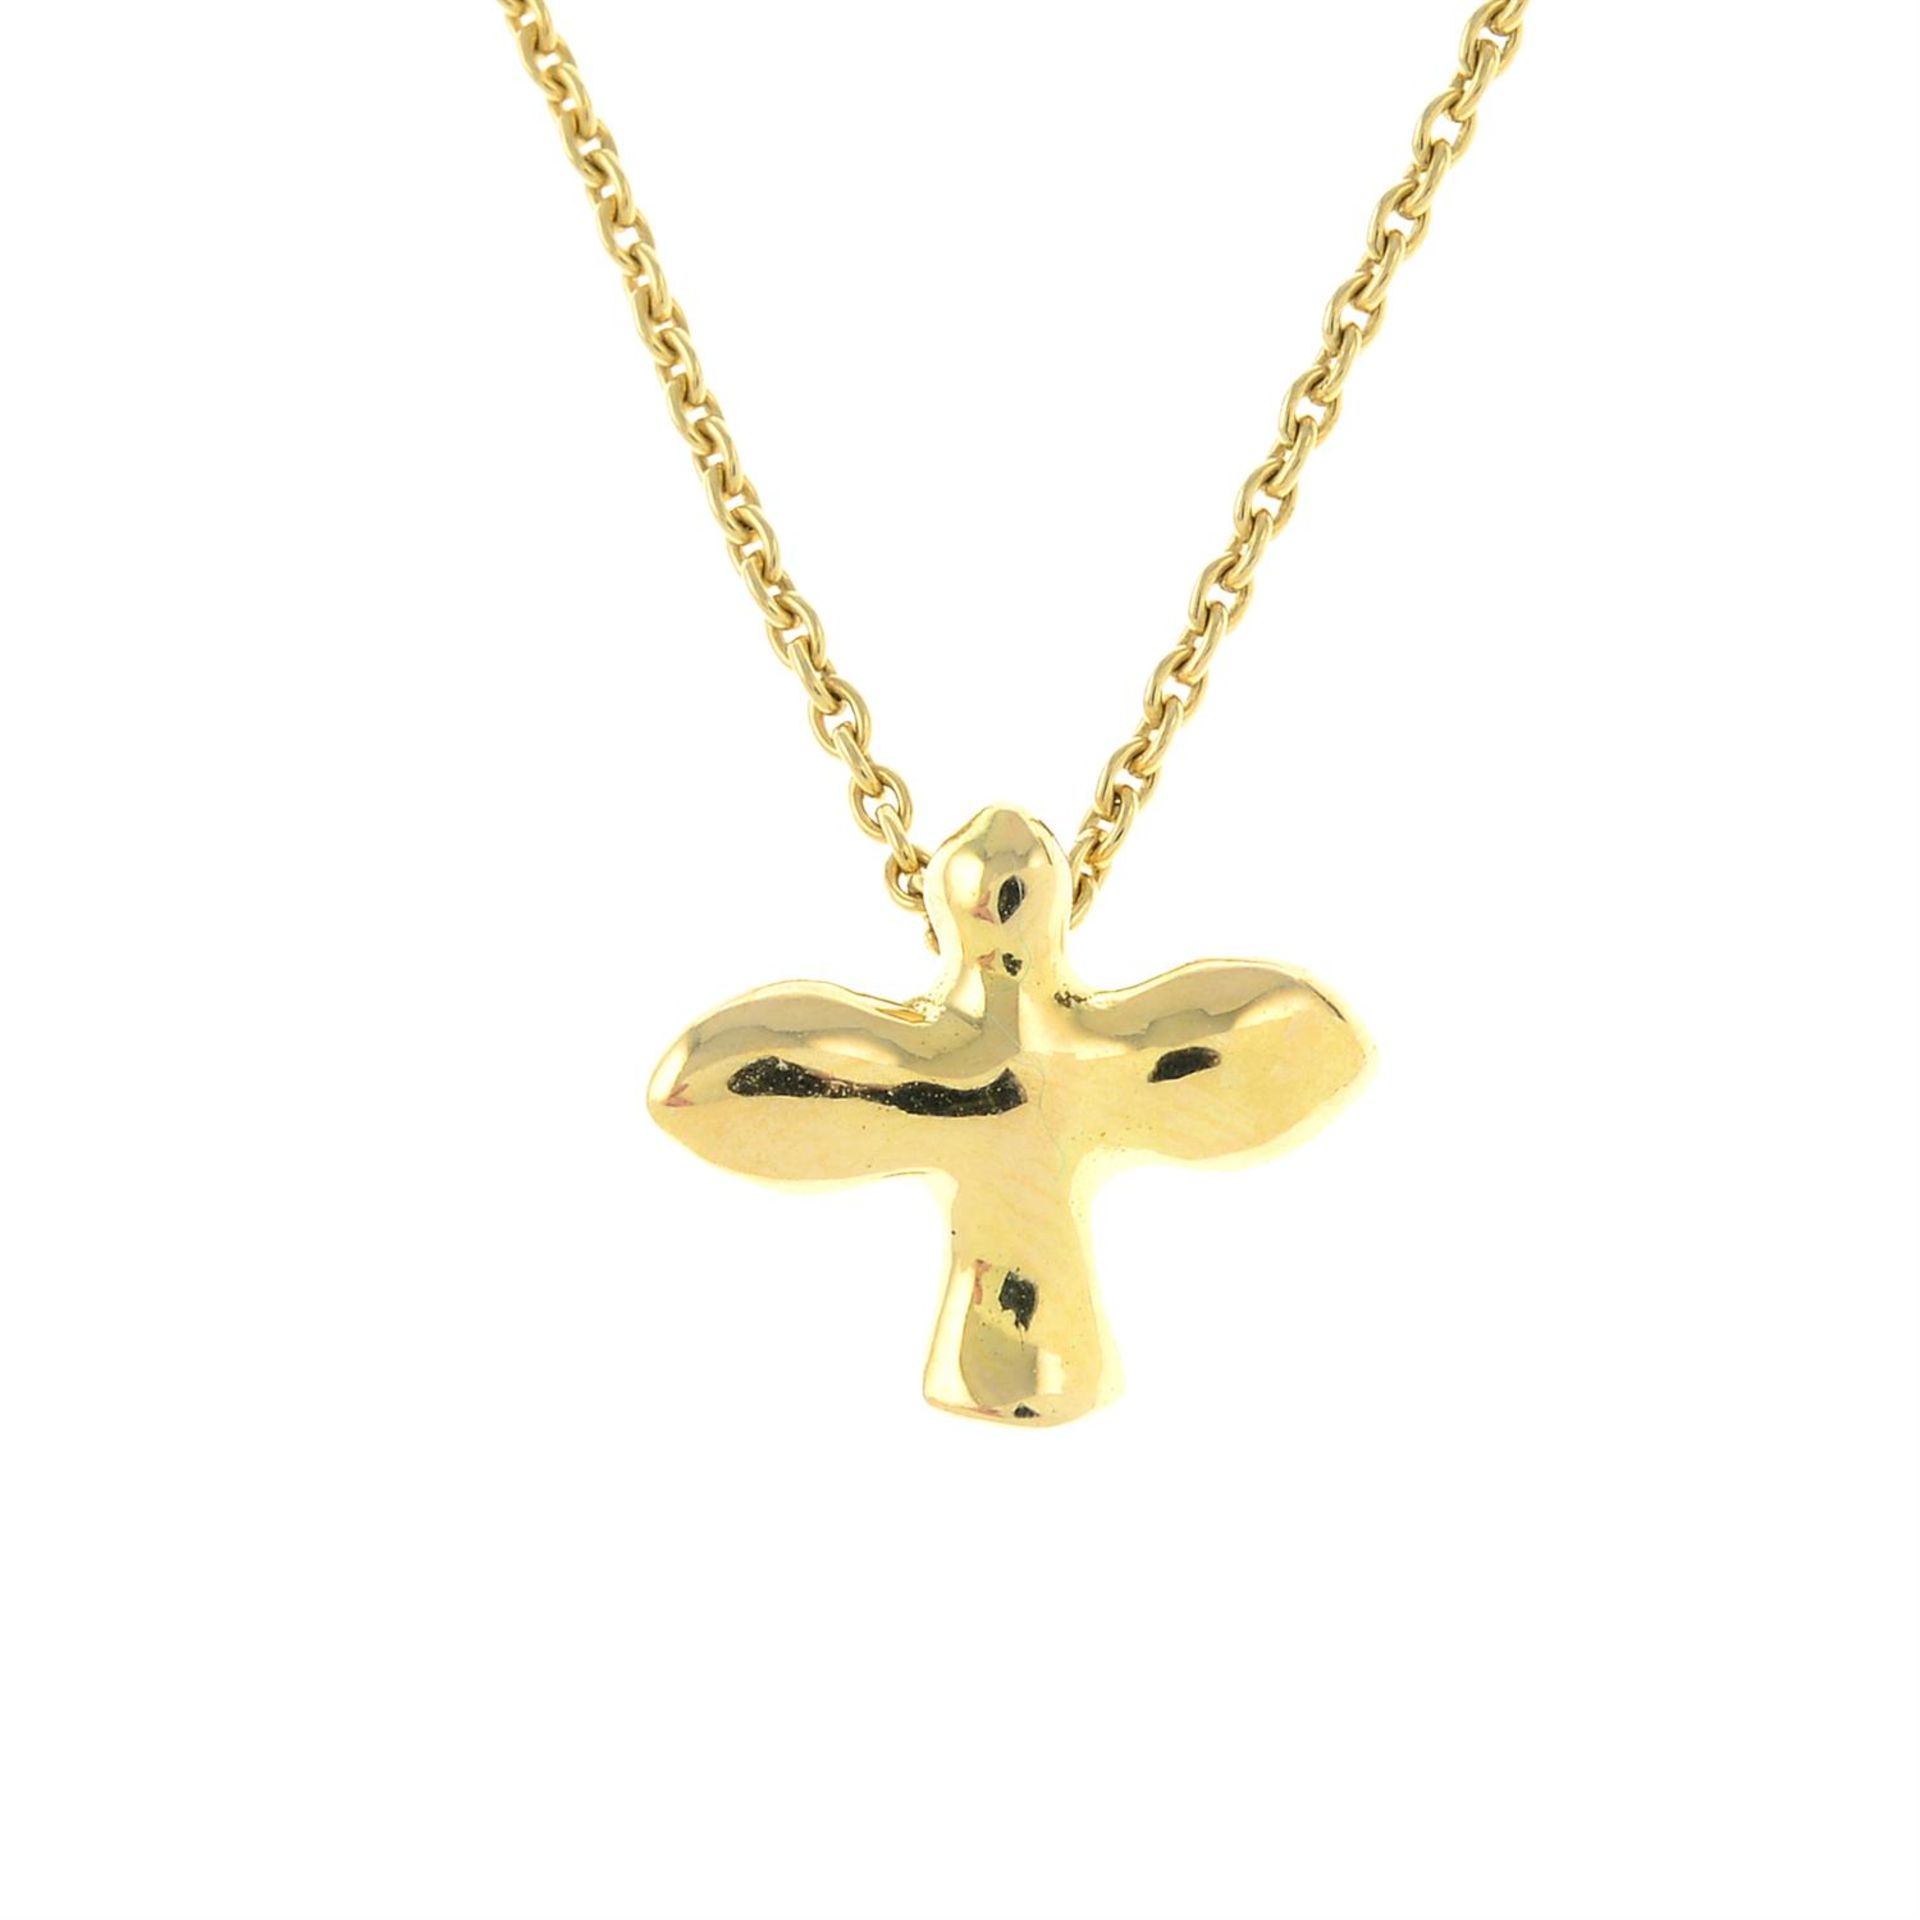 A 'Little Bird' pendant, with chain, by Tiffany & Co.